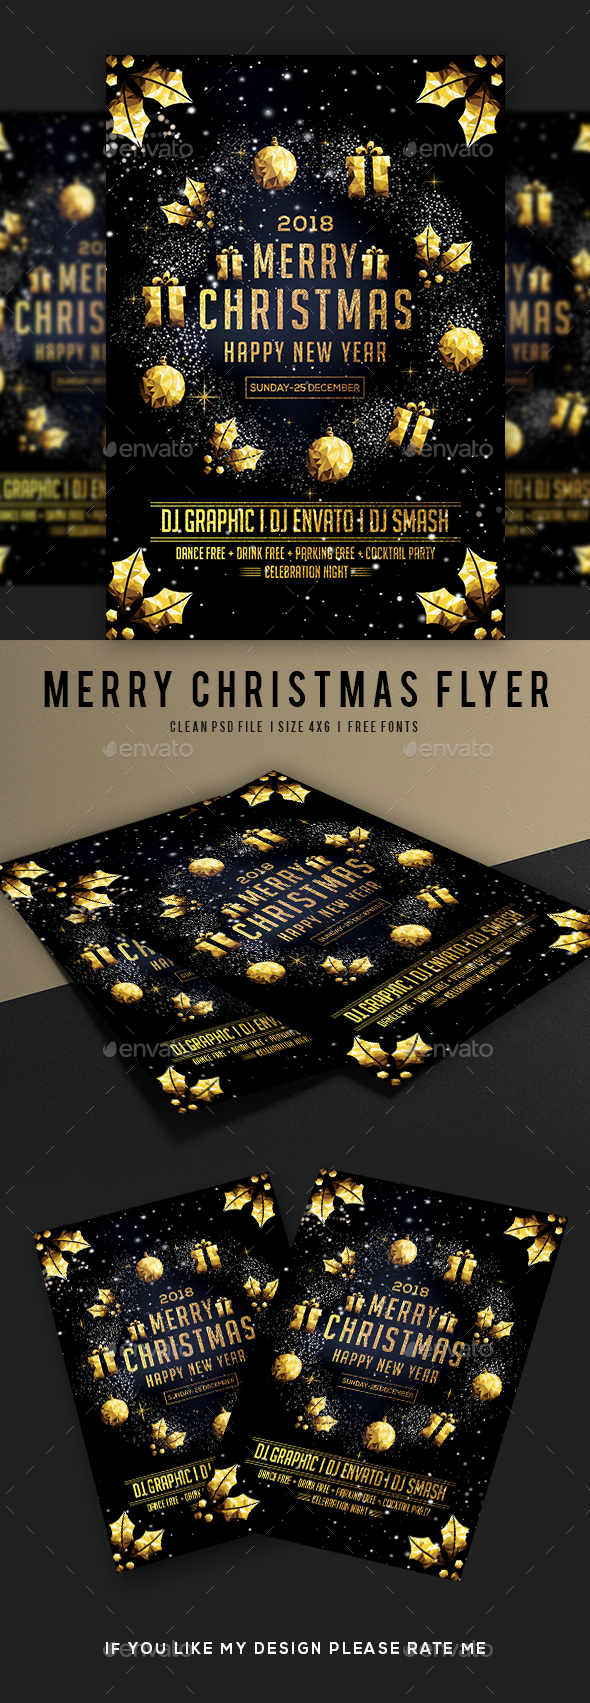 GraphicRiver Merry Christmas Flyer 20941905